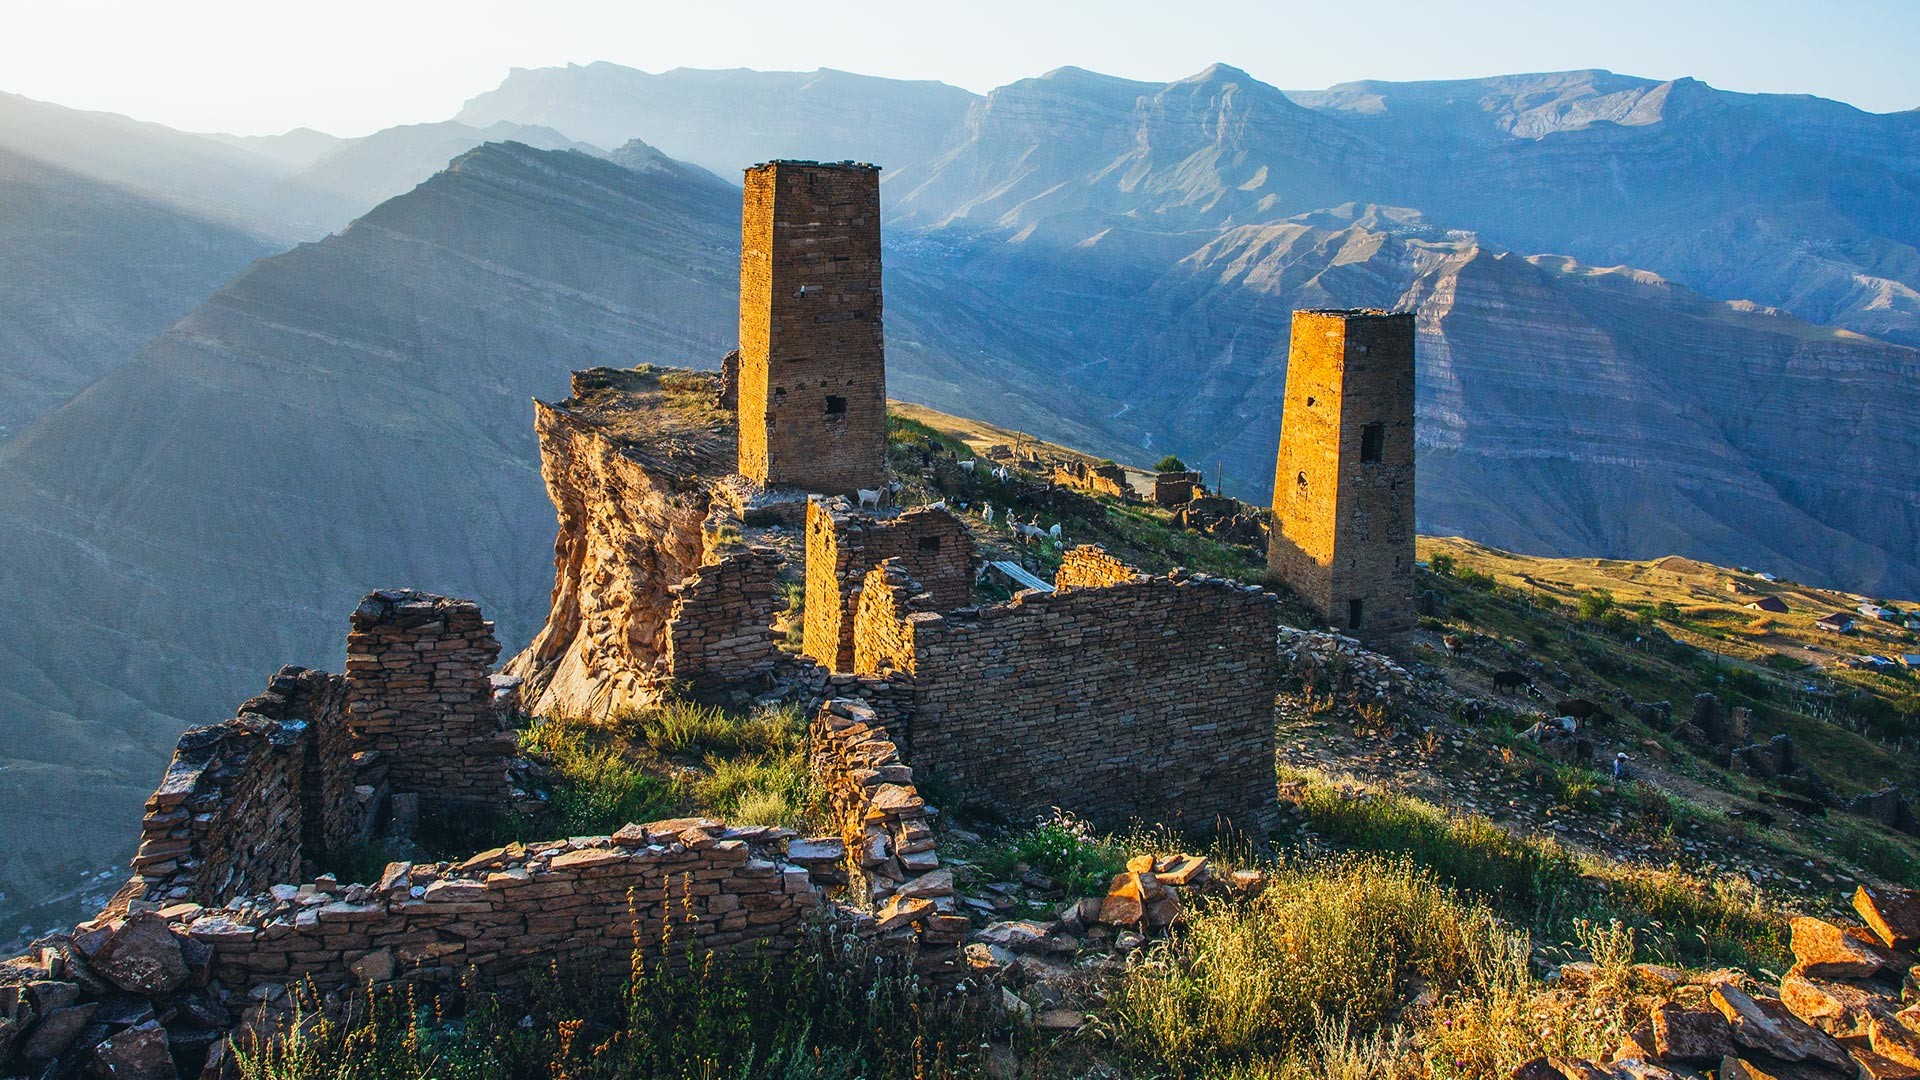 The Remains of the Aul of the Ghost Goor in Dagestan